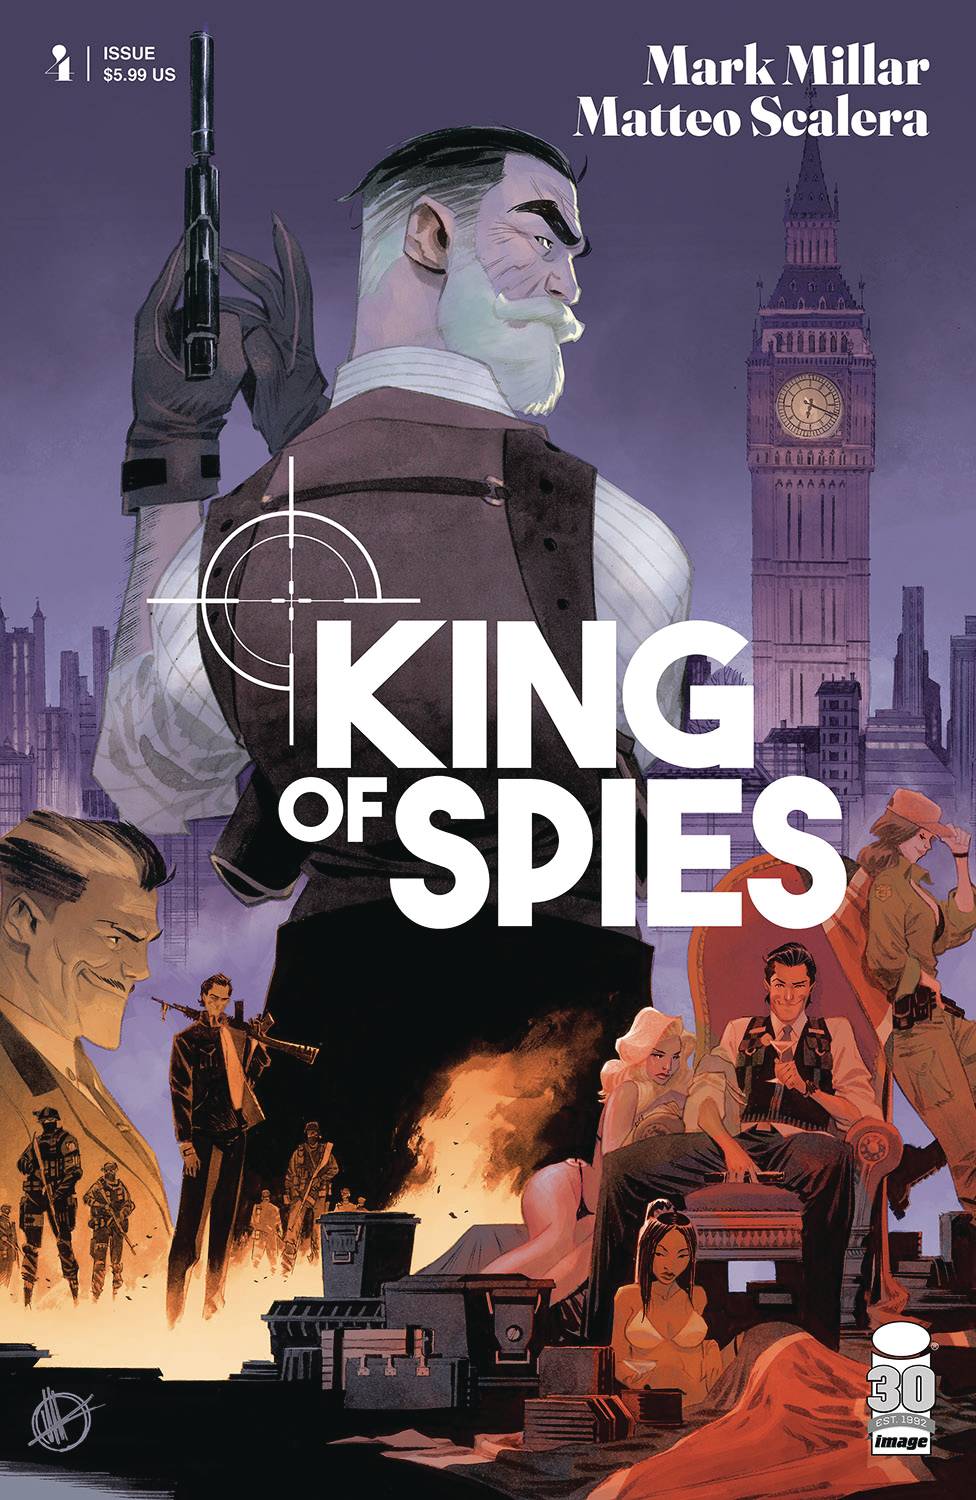 KING OF SPIES #4 (OF 4) CVR A SCALERA (MR)